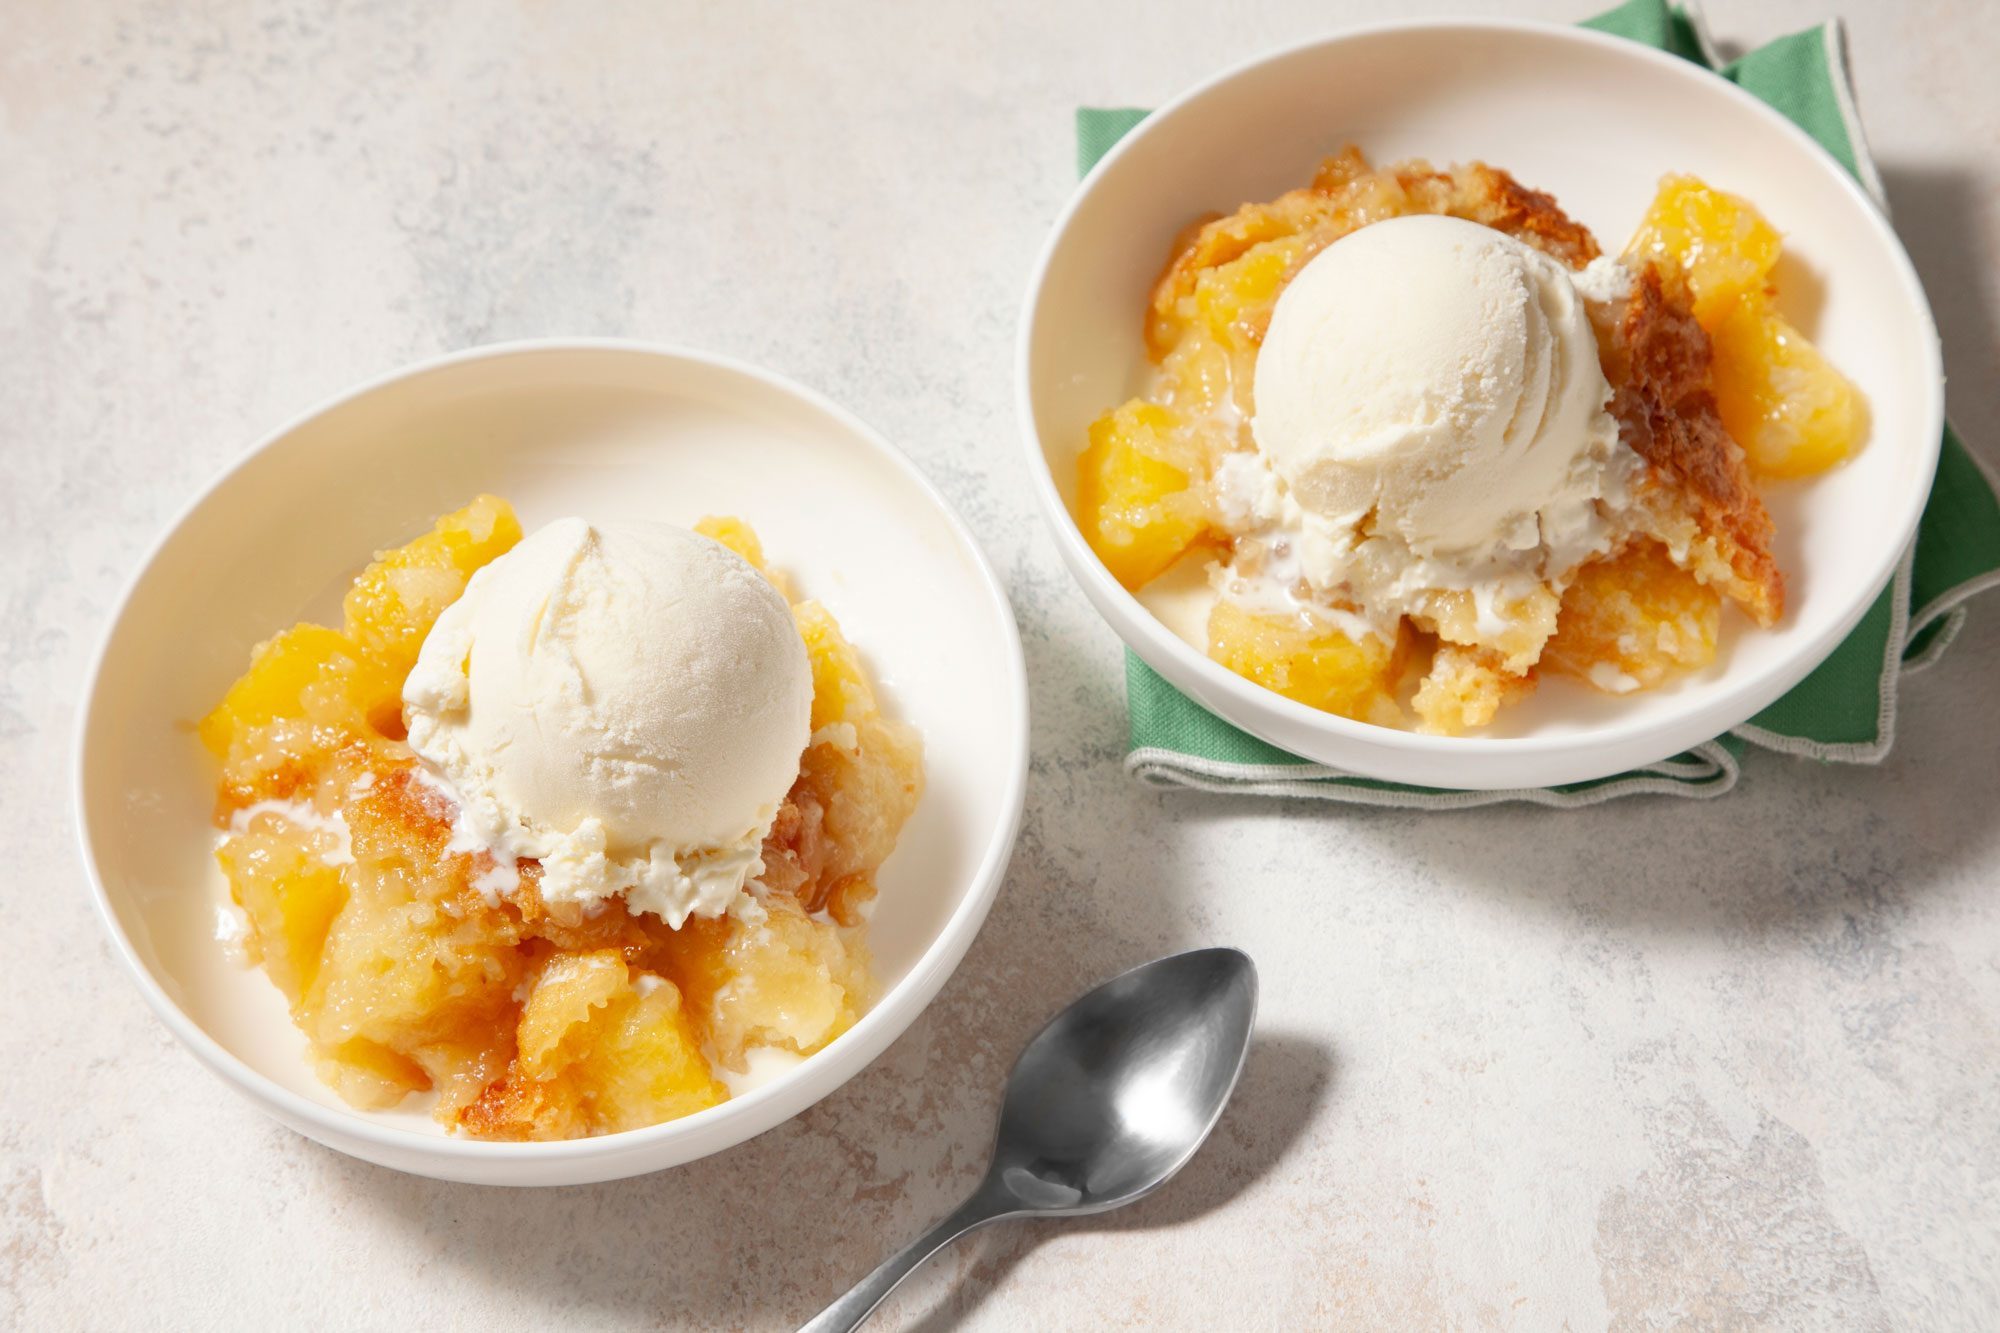 Pineapple Cobbler served in to bowls